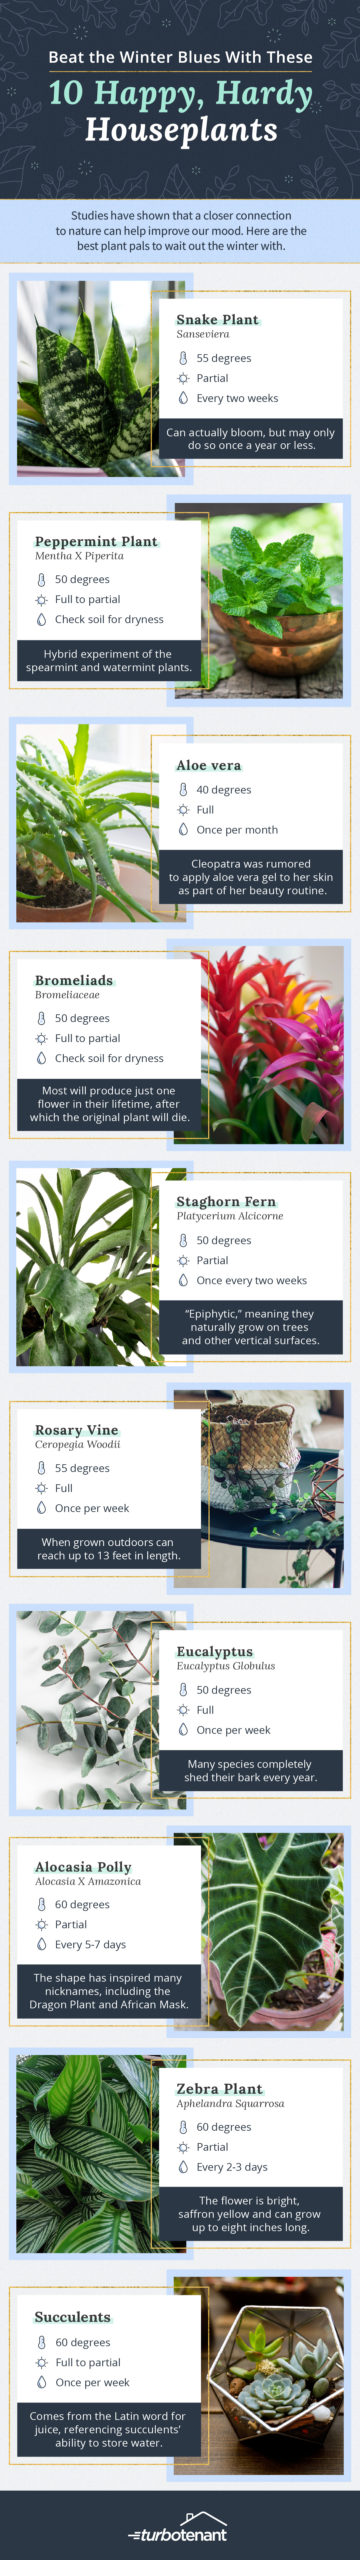 infographic guide for 10 winter indoor house plants